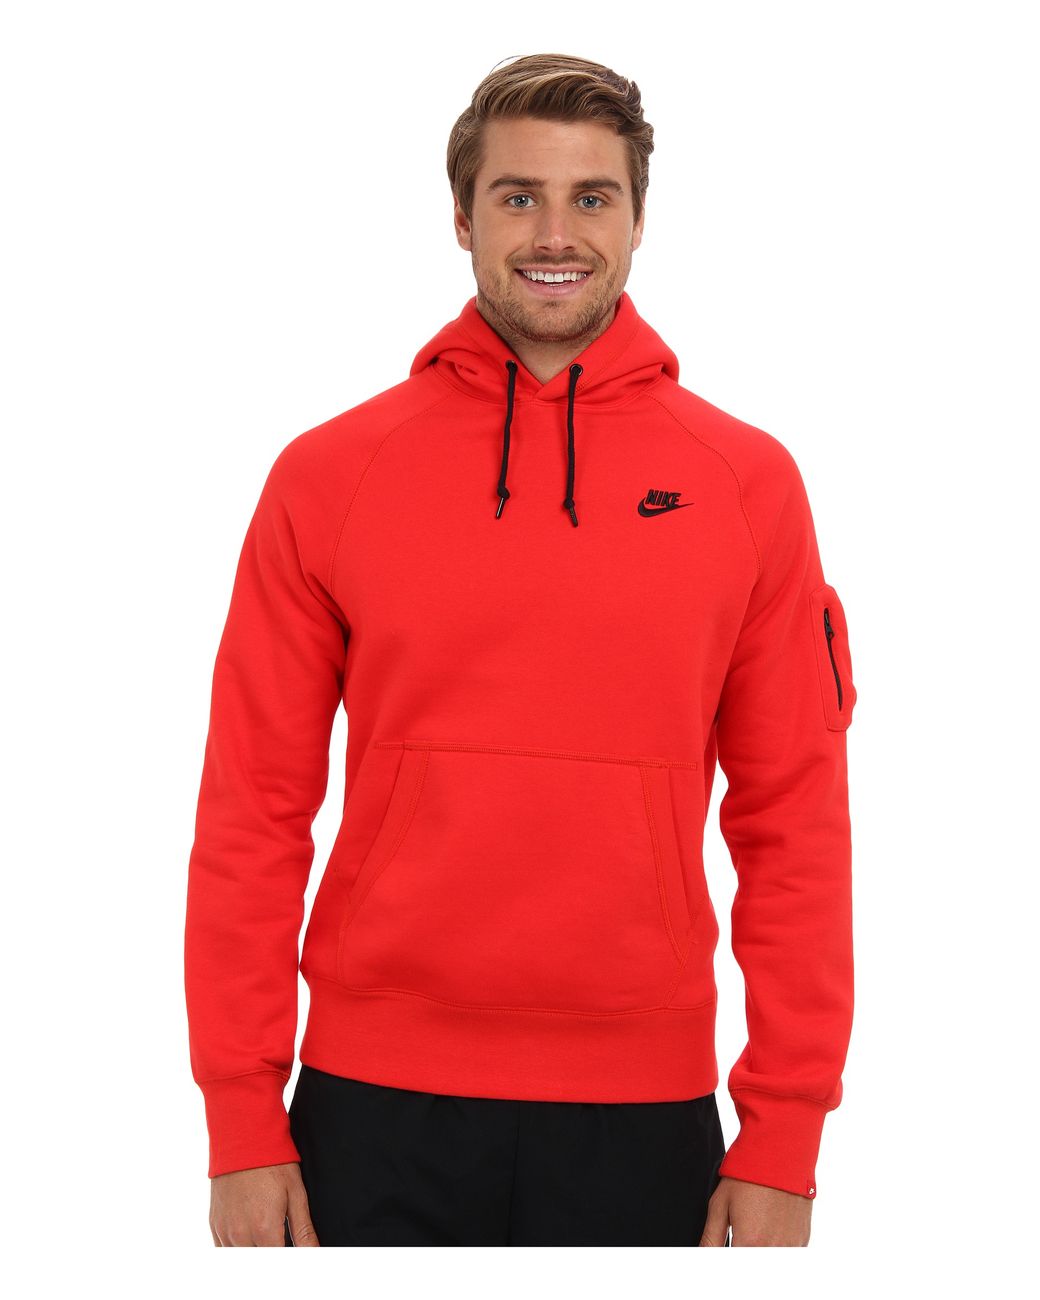 Nike Aw77 Fleece Pullover Hoodie in Red for | Lyst